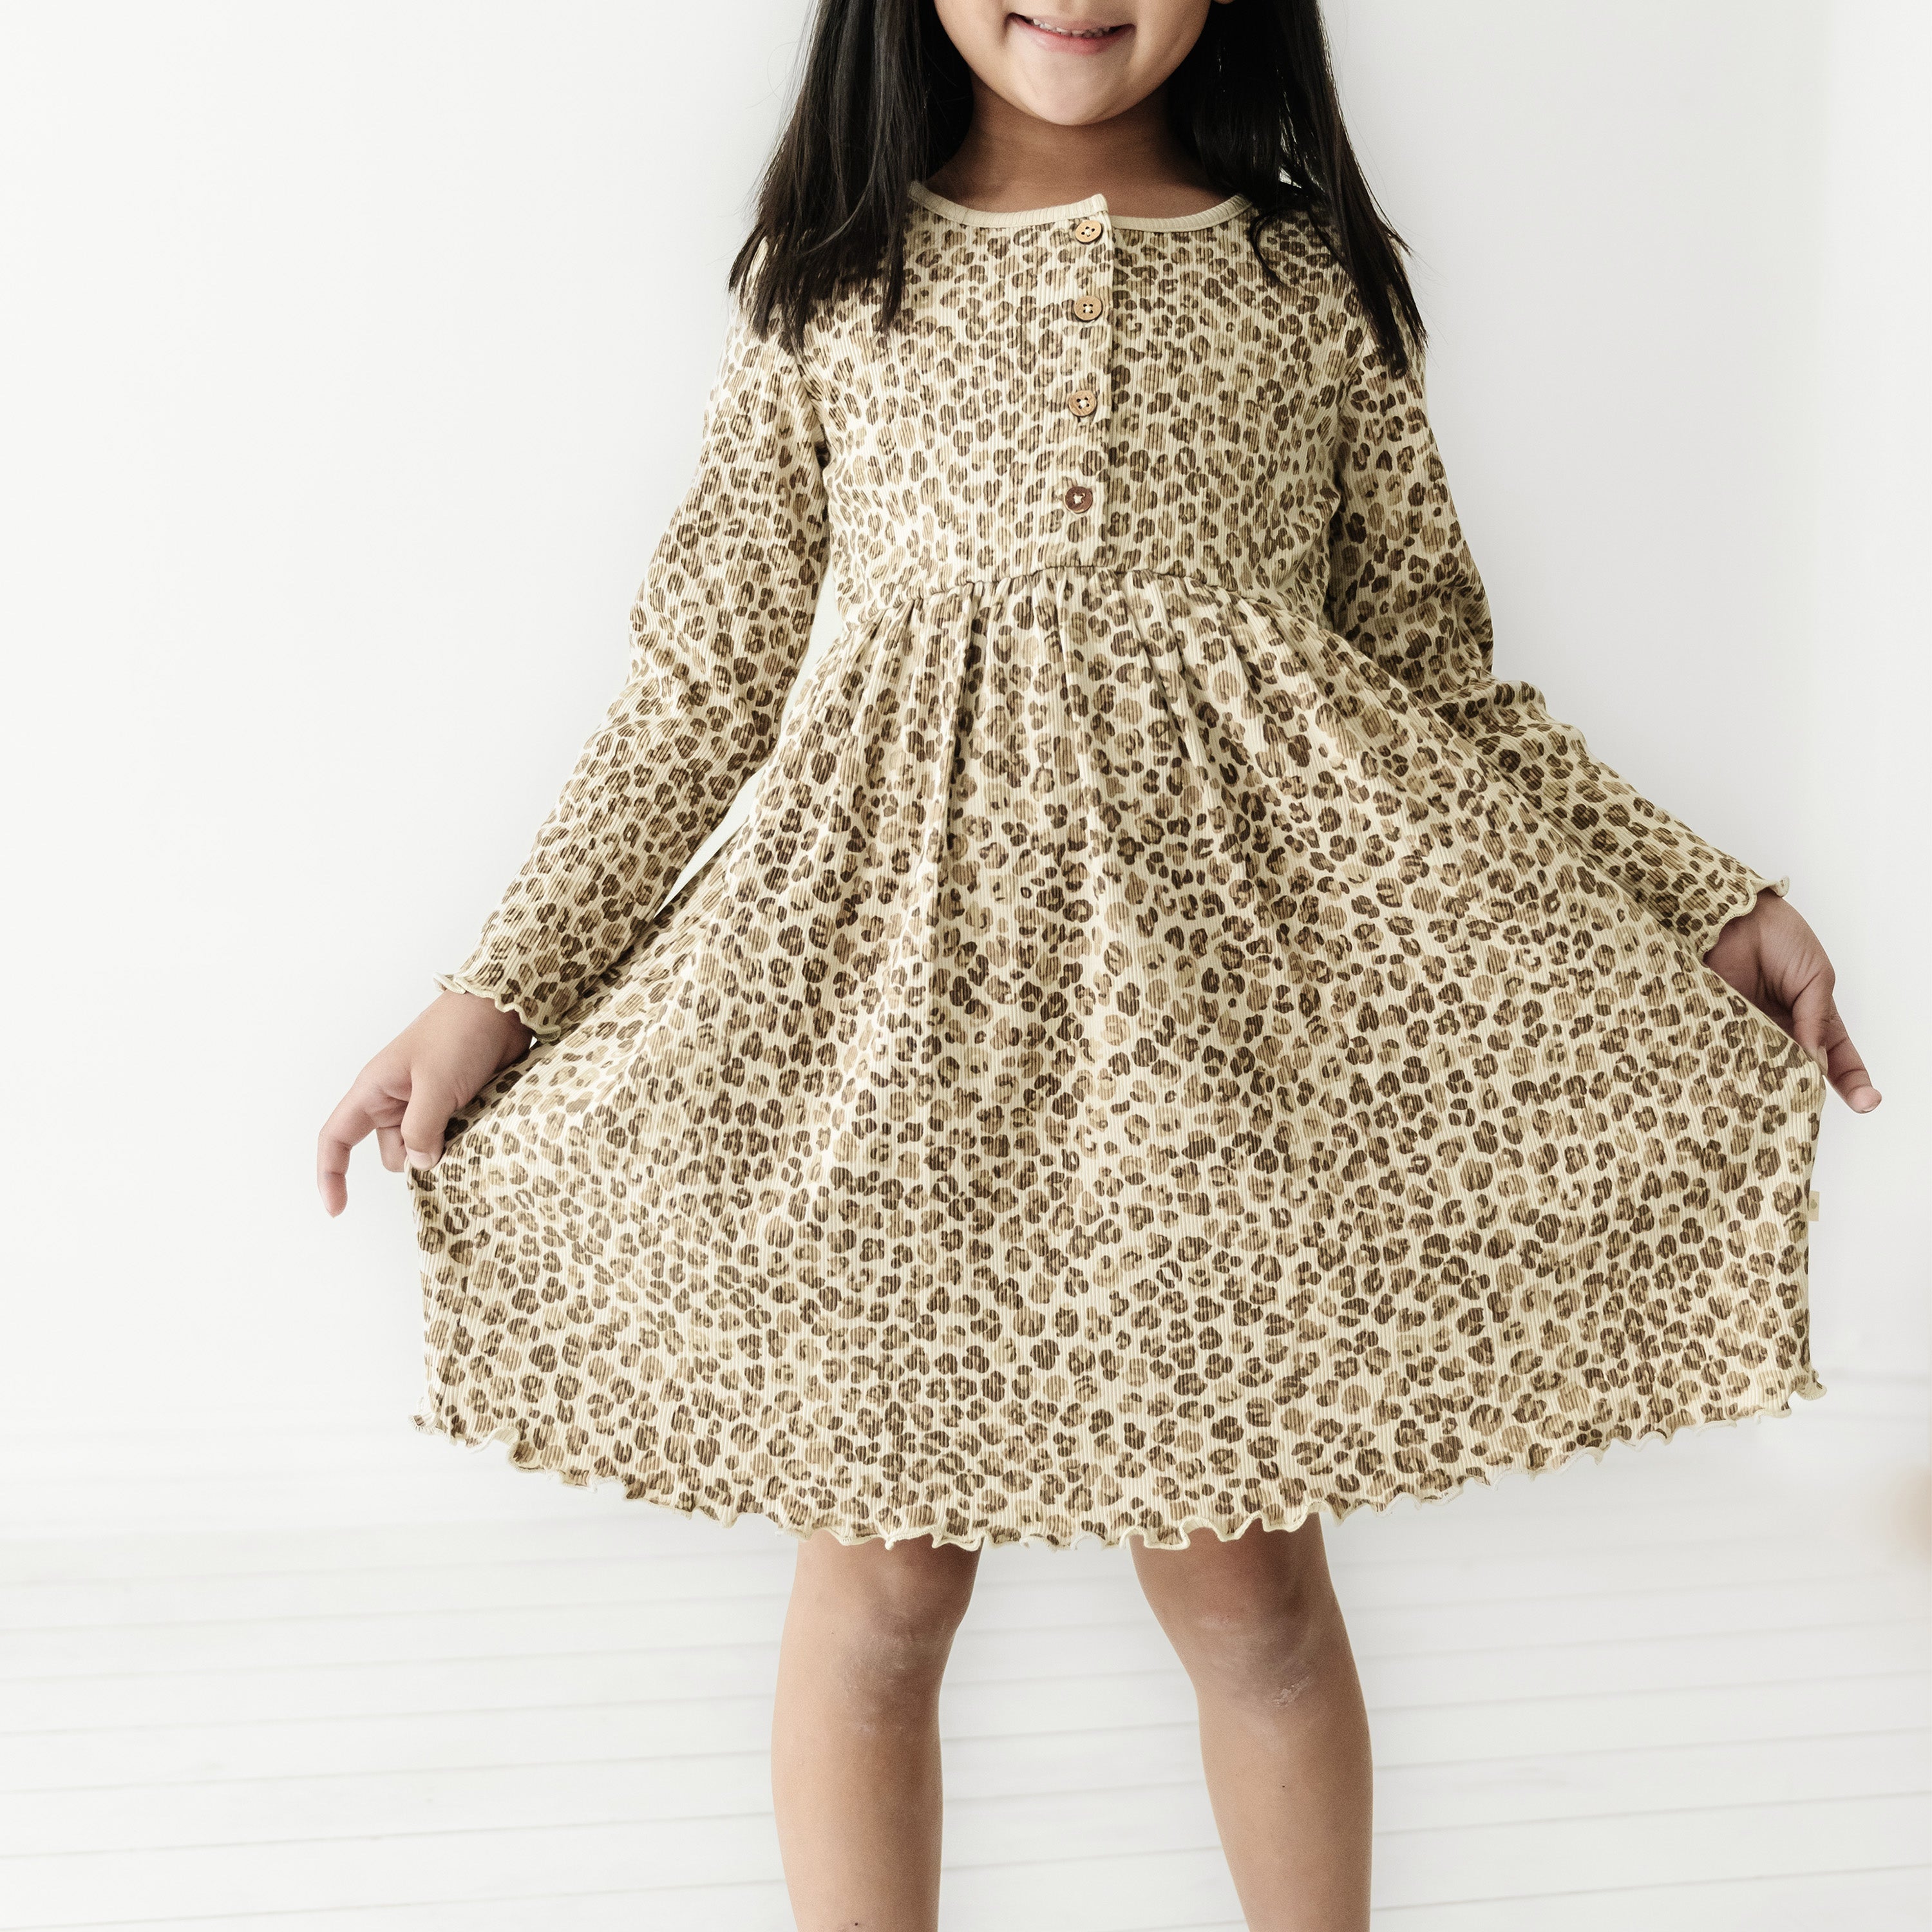 A young girl wearing a flowing Organic Baby leopard print dress, standing against a white background, smiling with her arms slightly outstretched.